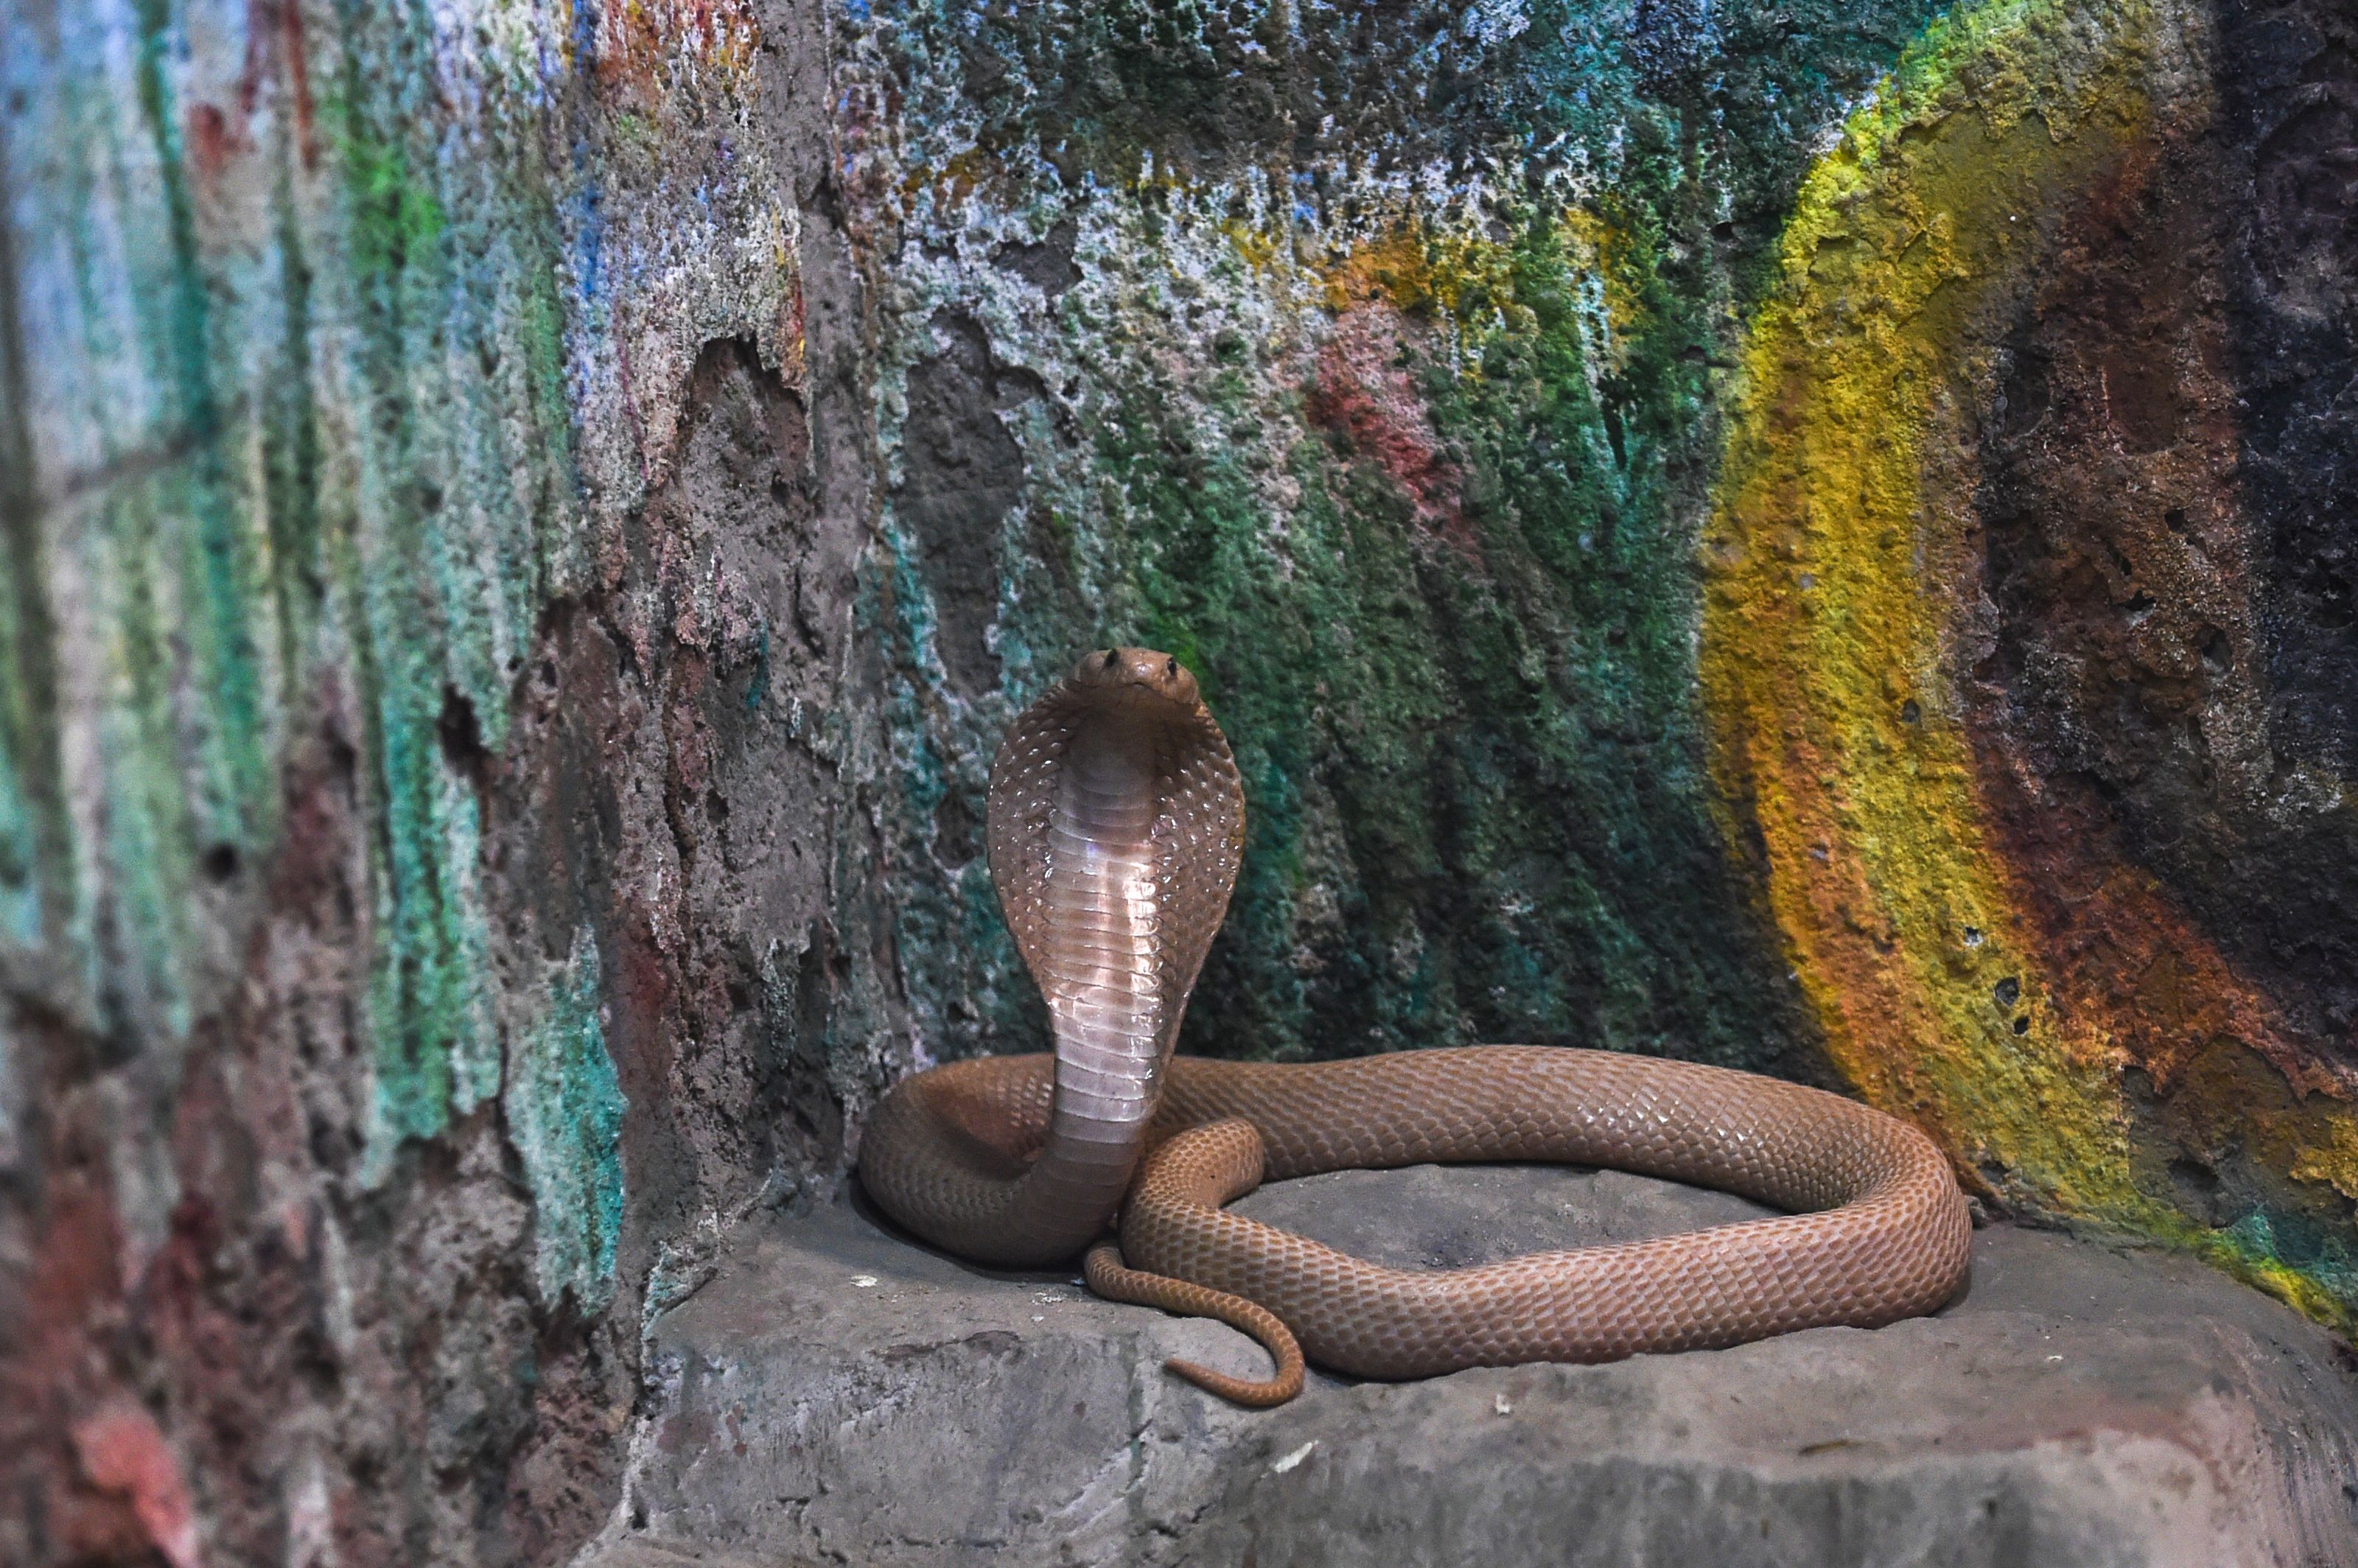 File: A venomous spectacled cobra, also known as Indian cobra (Naja Naja) or white cobra, is seen near a painting inside its enclosure at the Kamla Nehru Zoological Garden in Ahmedabad, Gujarat on 30 January 2019